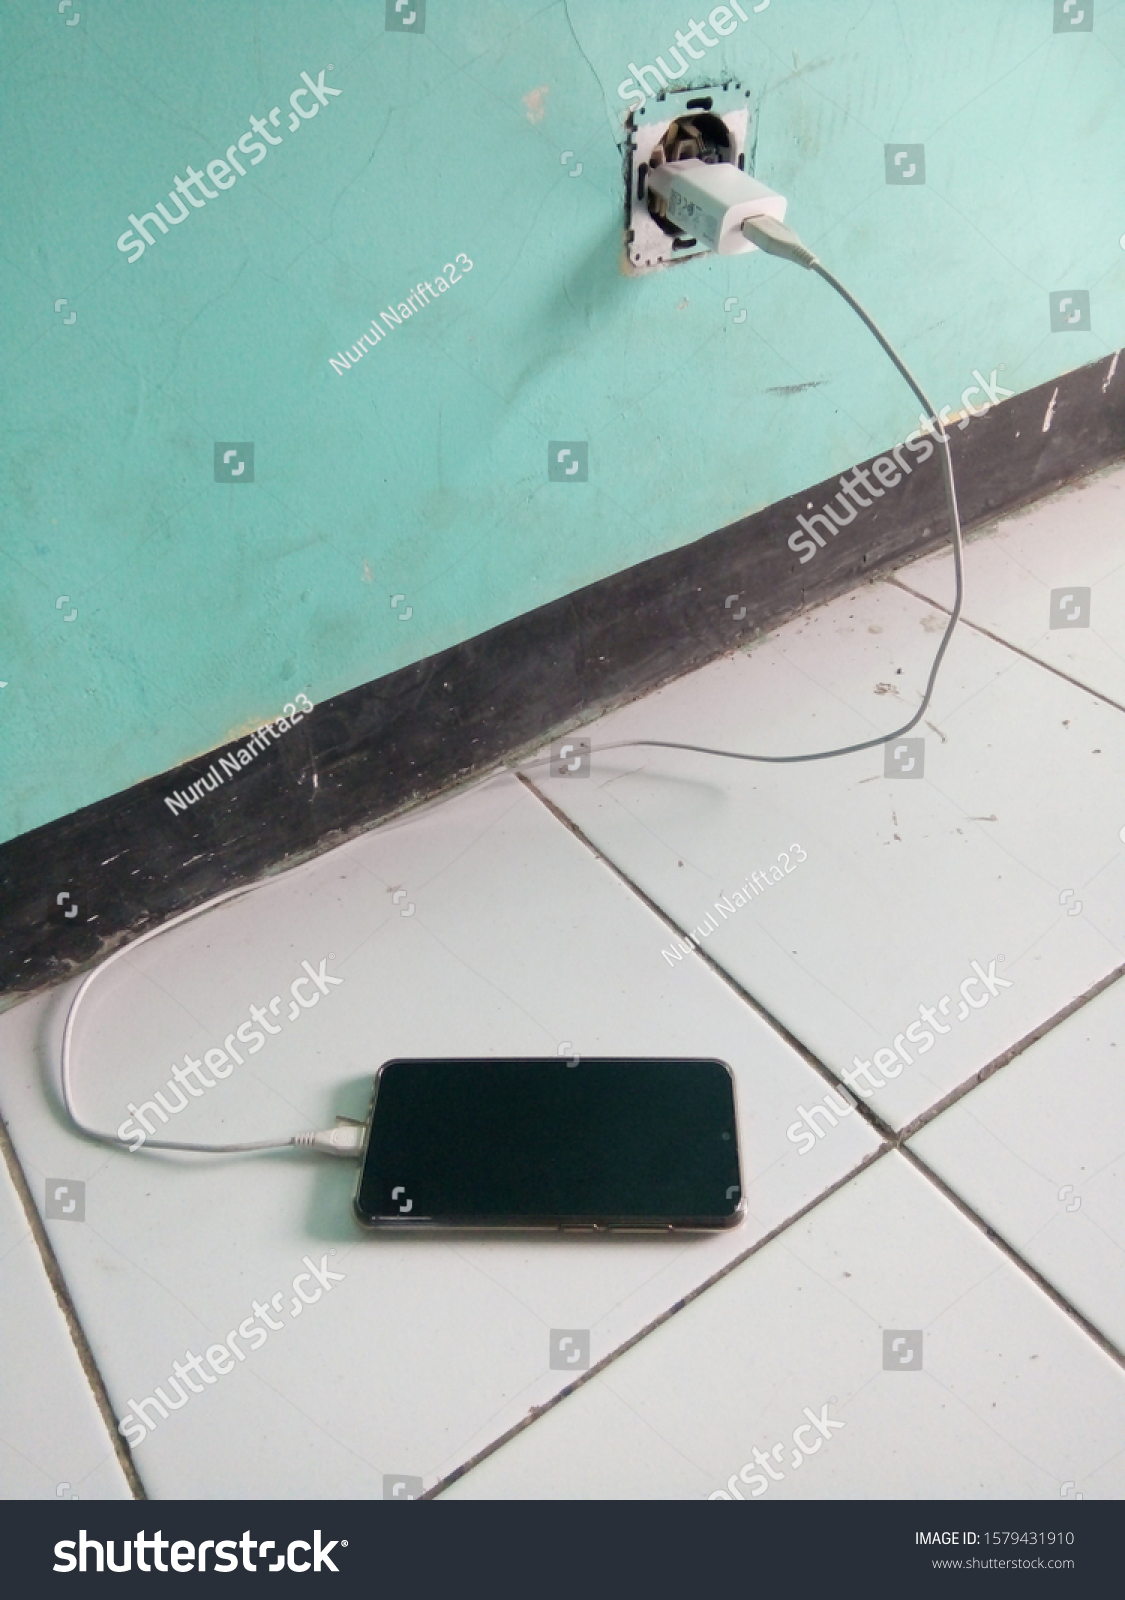 This picture is a picture of a cellphone that is charging  #1579431910